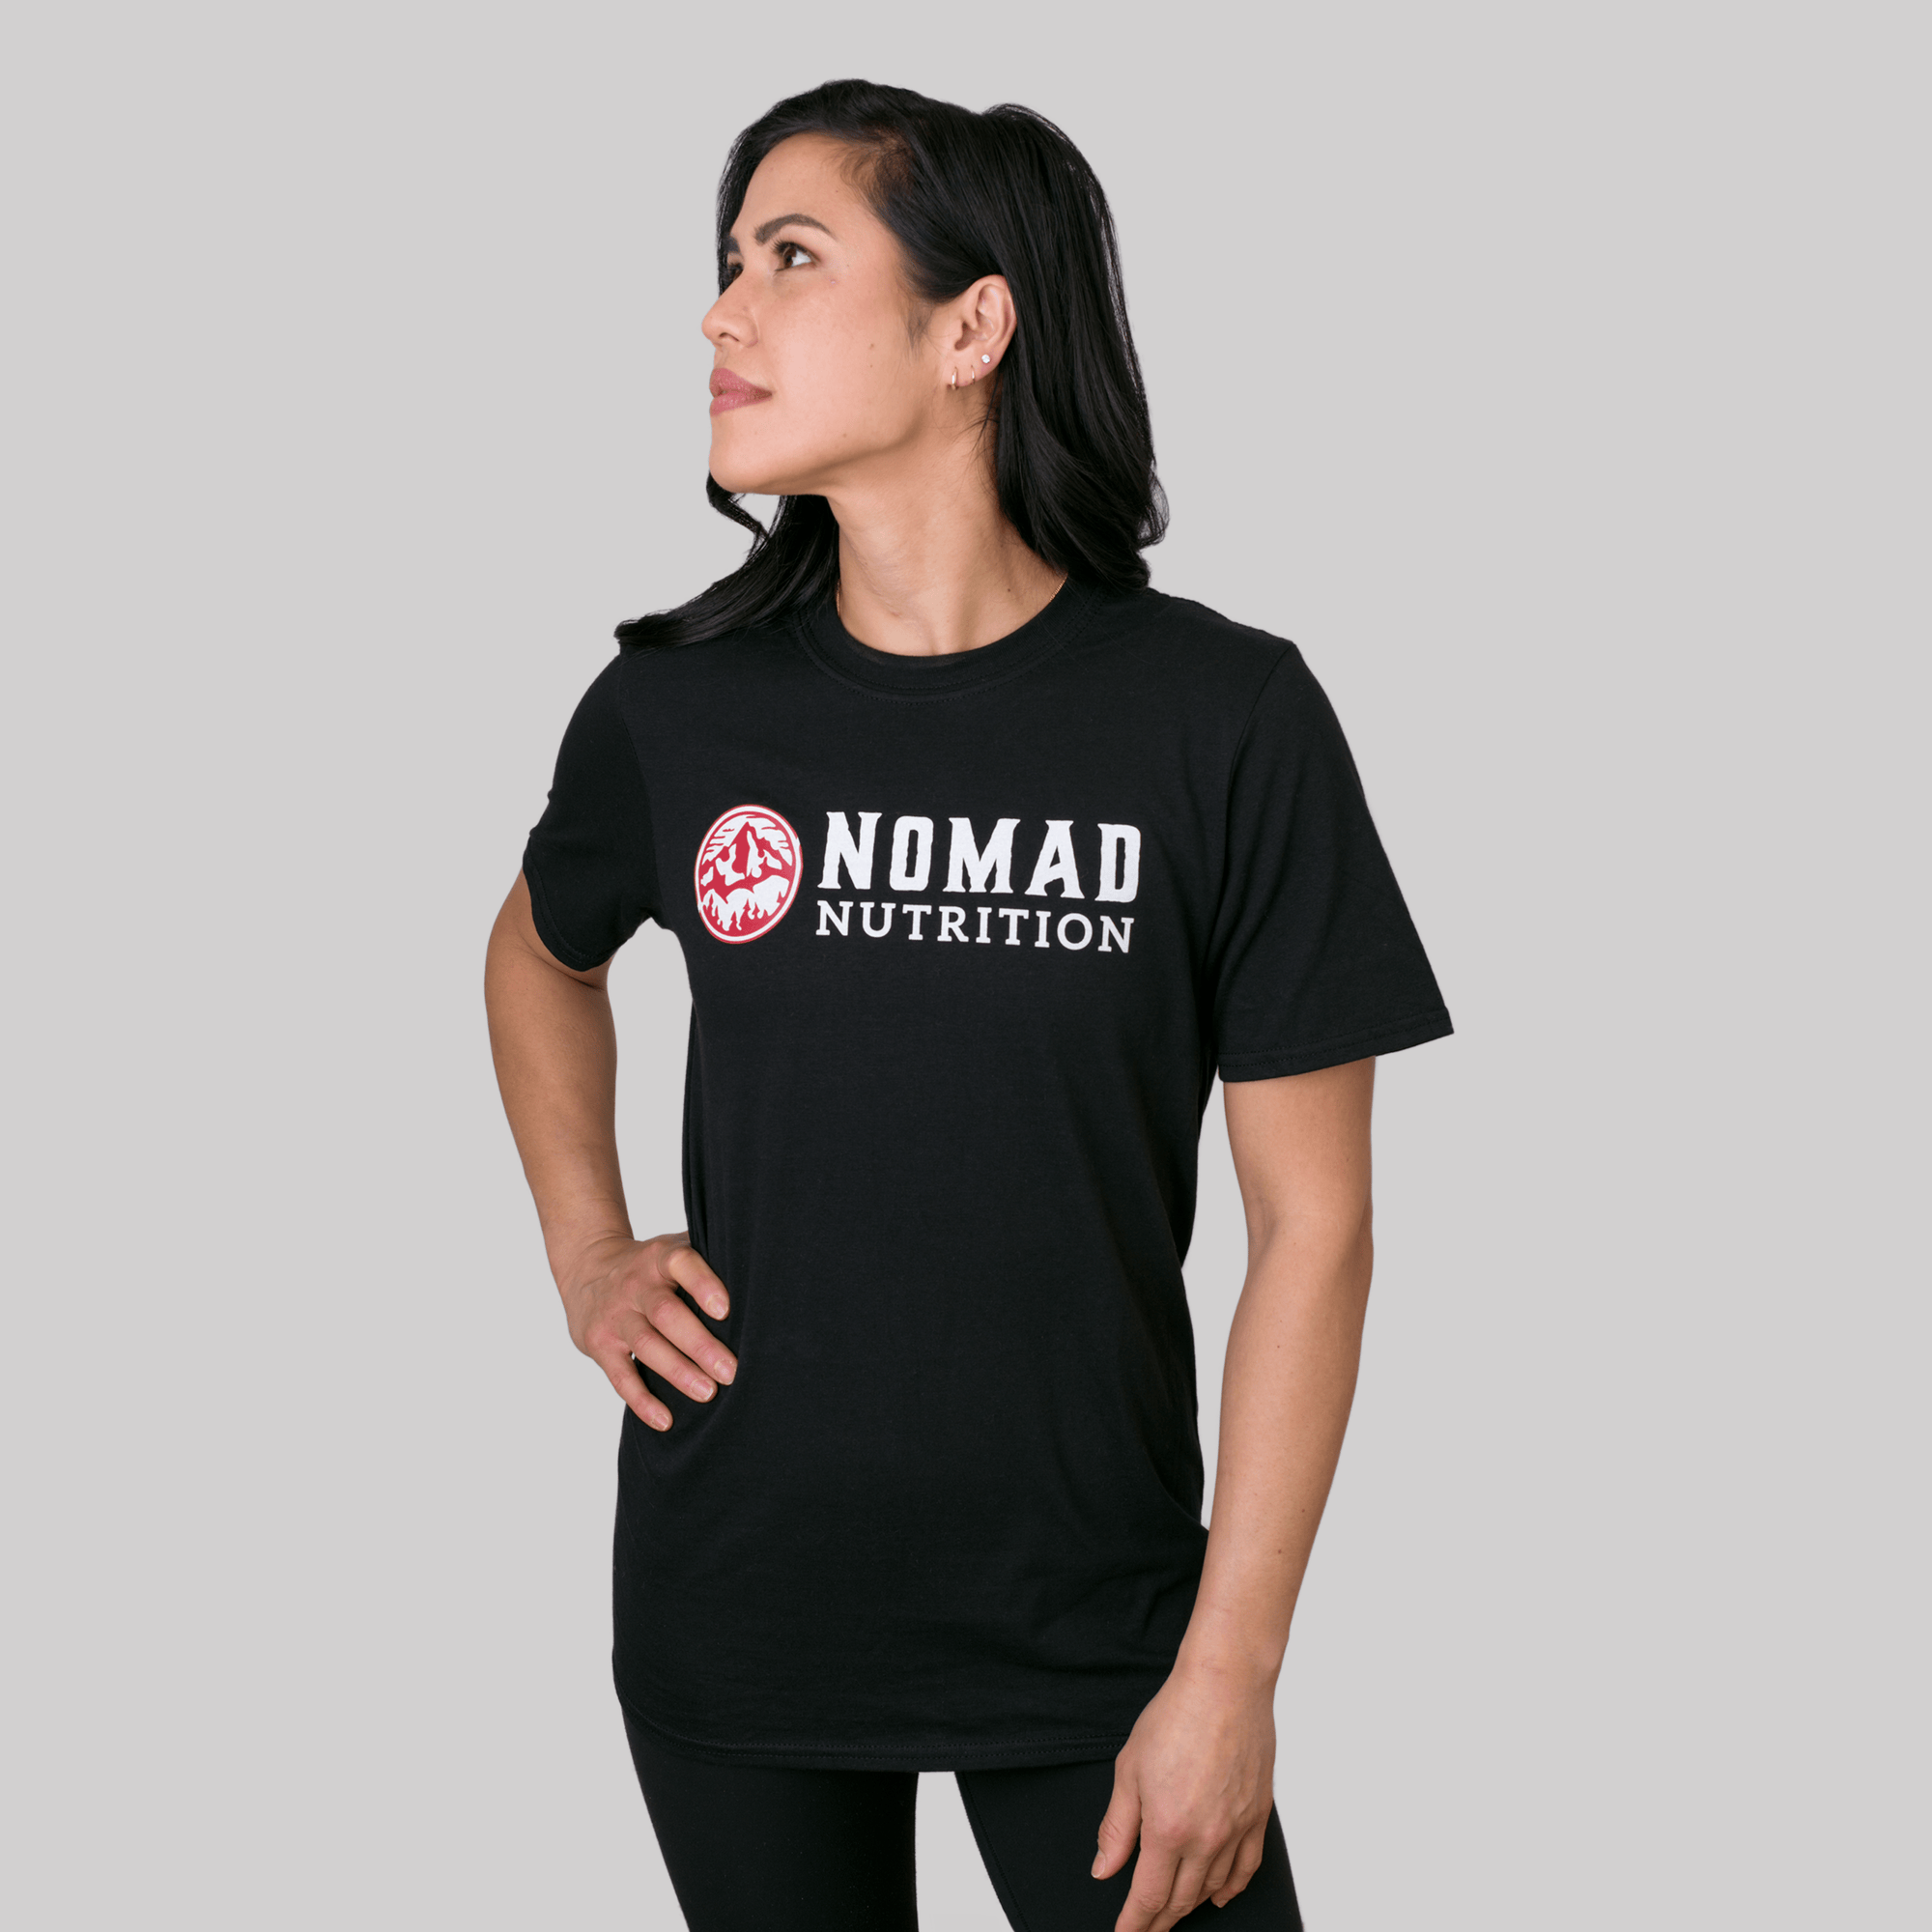 Nomad Nutrition Shadow T-shirt female model wearing small